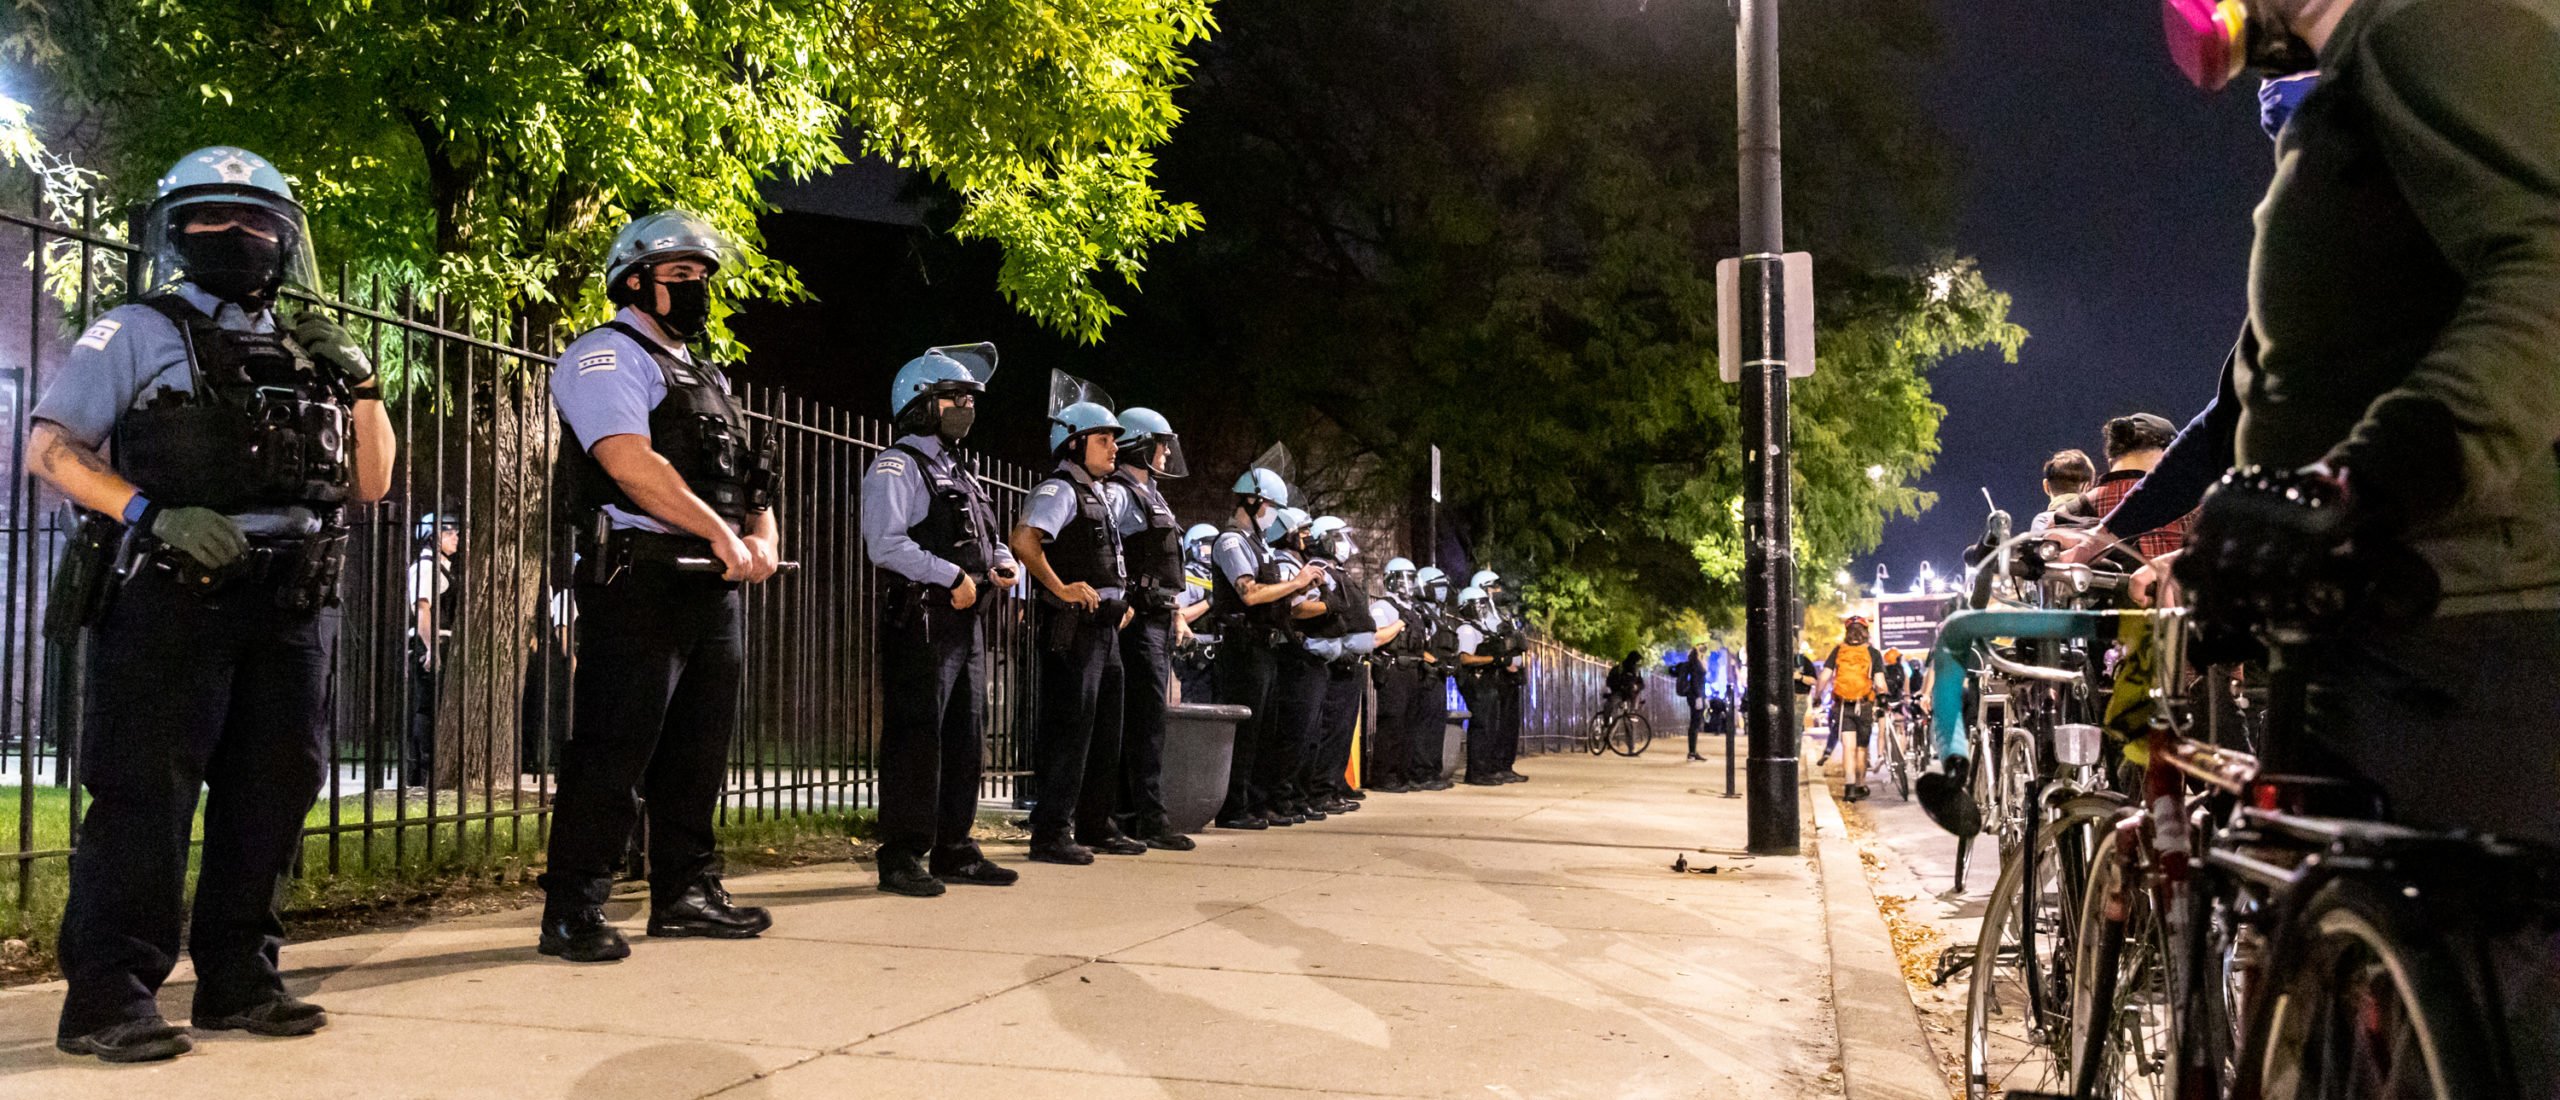 Chicago Police lined the sidewalks during a demonstration on September 23, 2020 in Chicago, Illinois. Across the country, protesters have taken to the streets after the grand jury’s decision to only charge one Louisville Metro Police officer in the raid in which Taylor was killed. Officer Brett Hankison, who was fired in June, was charged three counts of wanton endangerment for shooting into neighboring apartments. Bond was set at $15,000 for Hankison. Taylor, a 26-year-old emergency medical technician, was killed in her home during a no-knock raid on March 13, 2020. (Photo by Natasha Moustache/Getty Images)